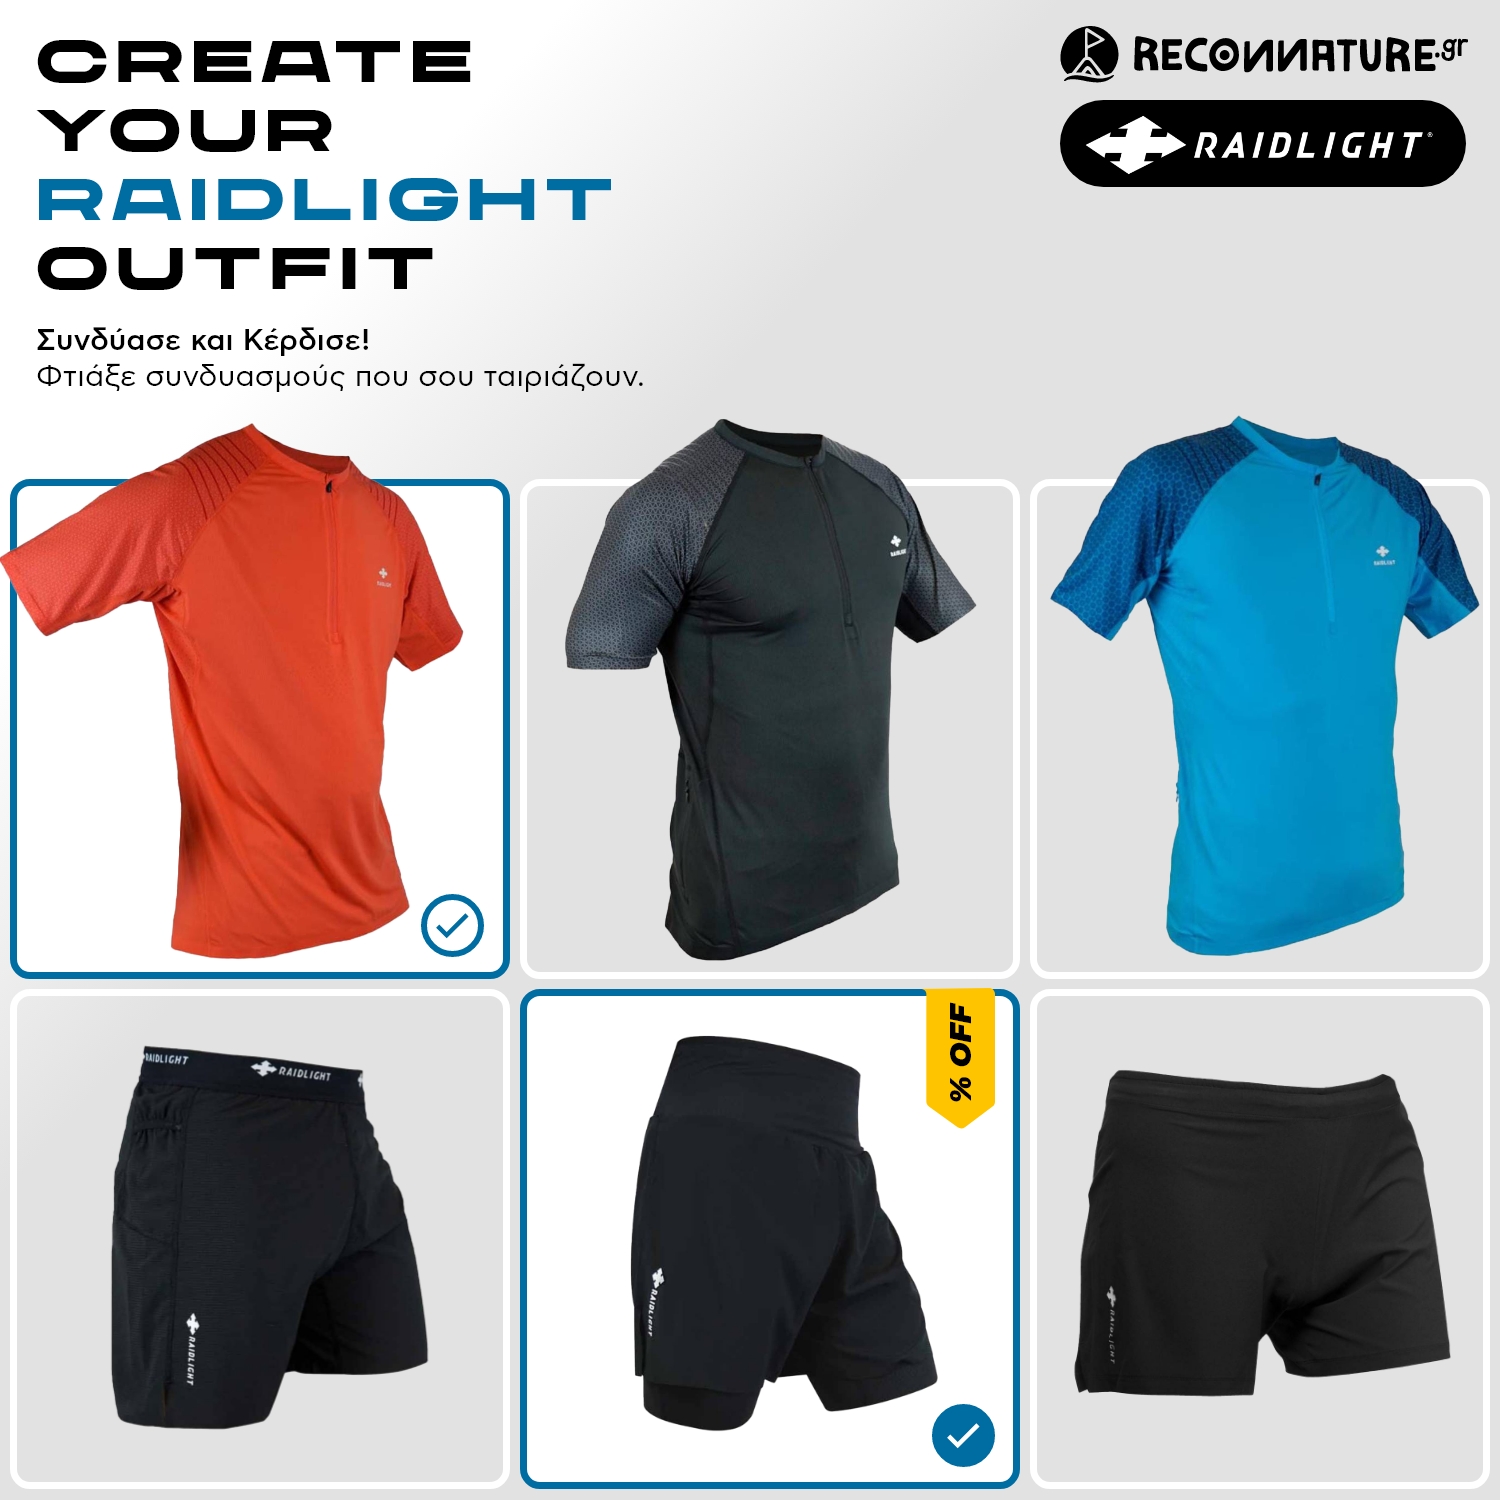 CREATE YOUR RAIDLIGHT OUTFIT-reconnature.gr